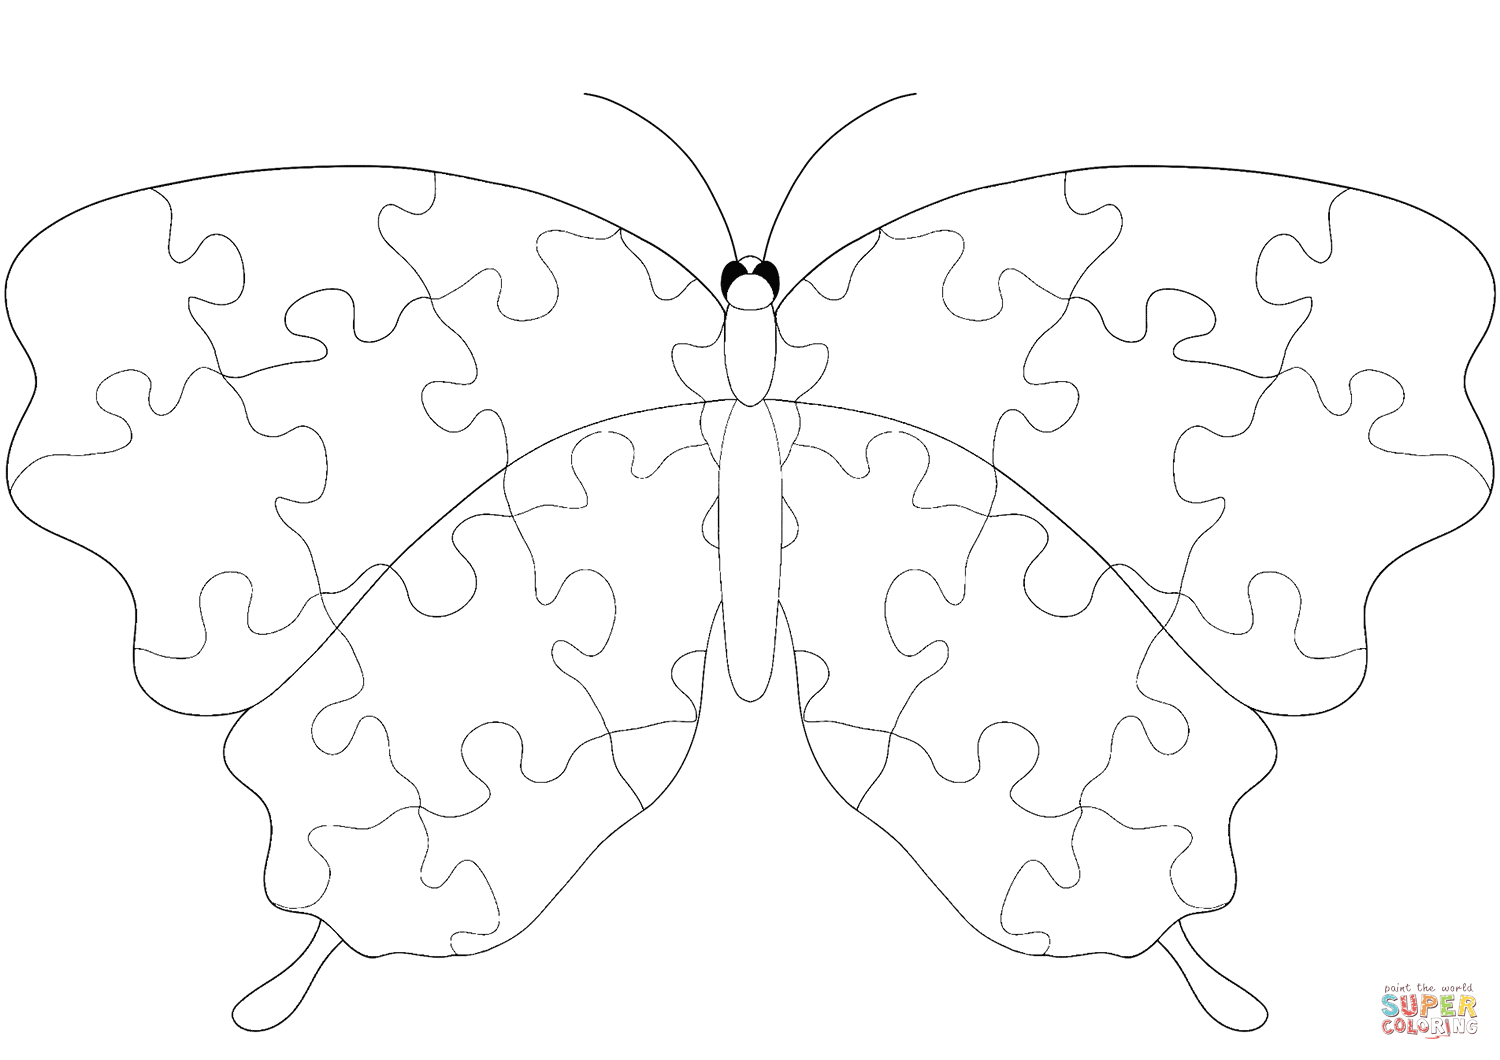 Butterfly With Jigsaw Puzzle Pattern Coloring Page | Free Printable - Printable Puzzle Coloring Pages